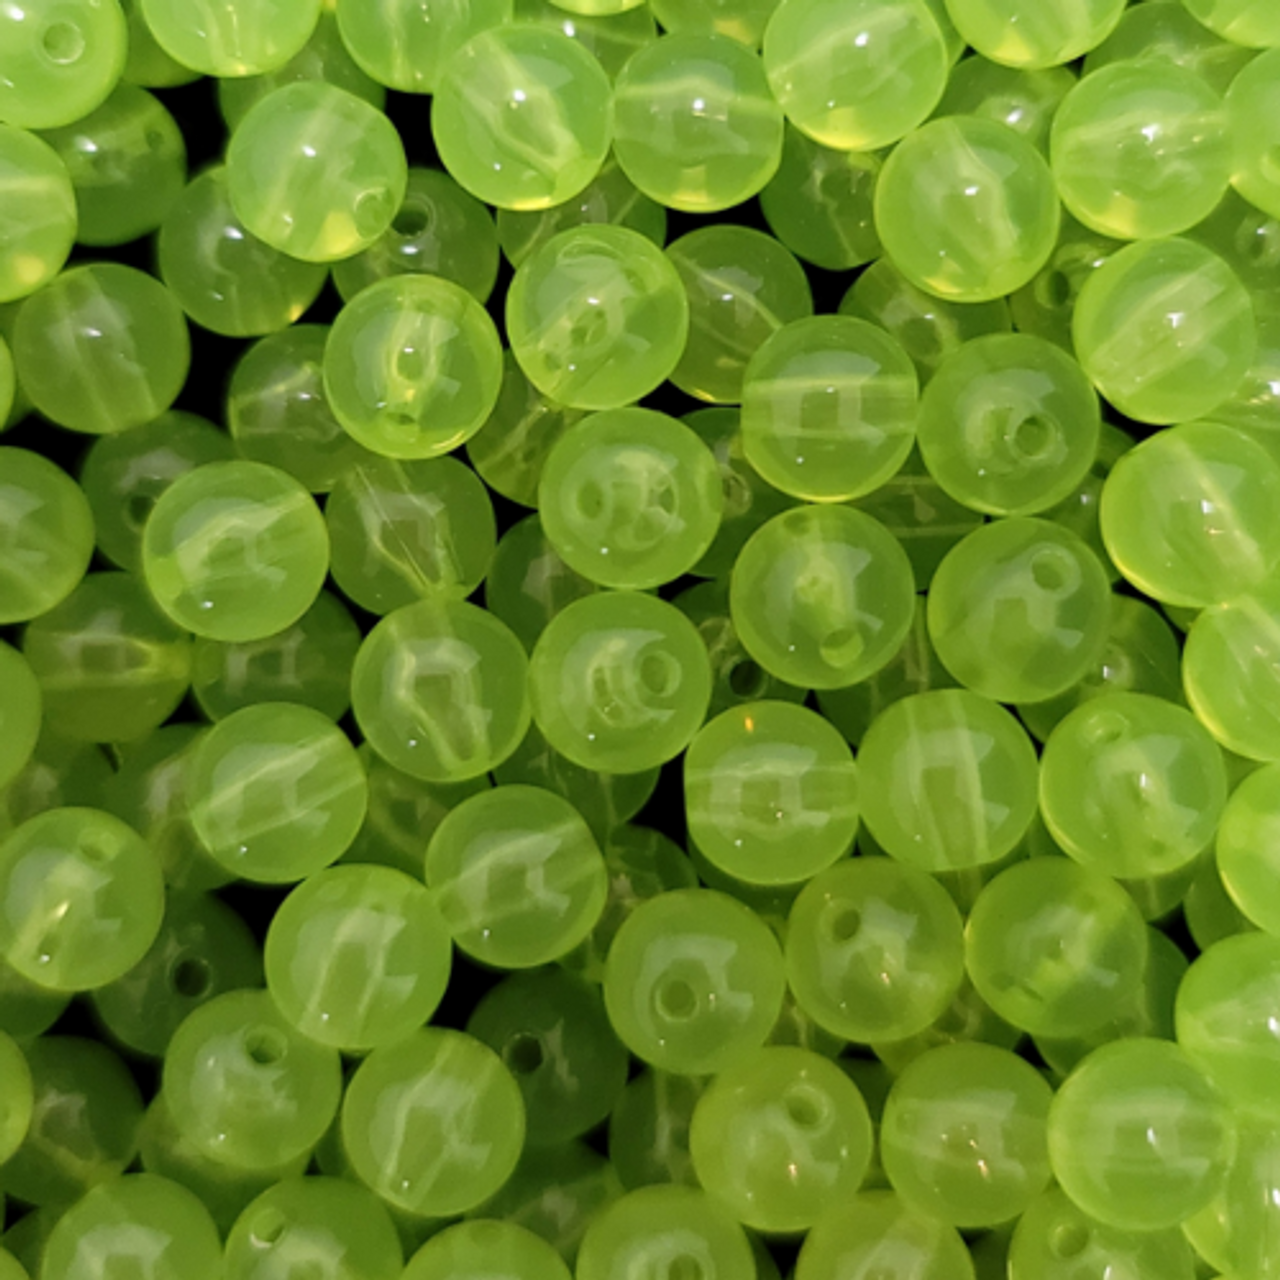 Transparent LIME GREEN Round 8mm 50/PK Fishing Beads